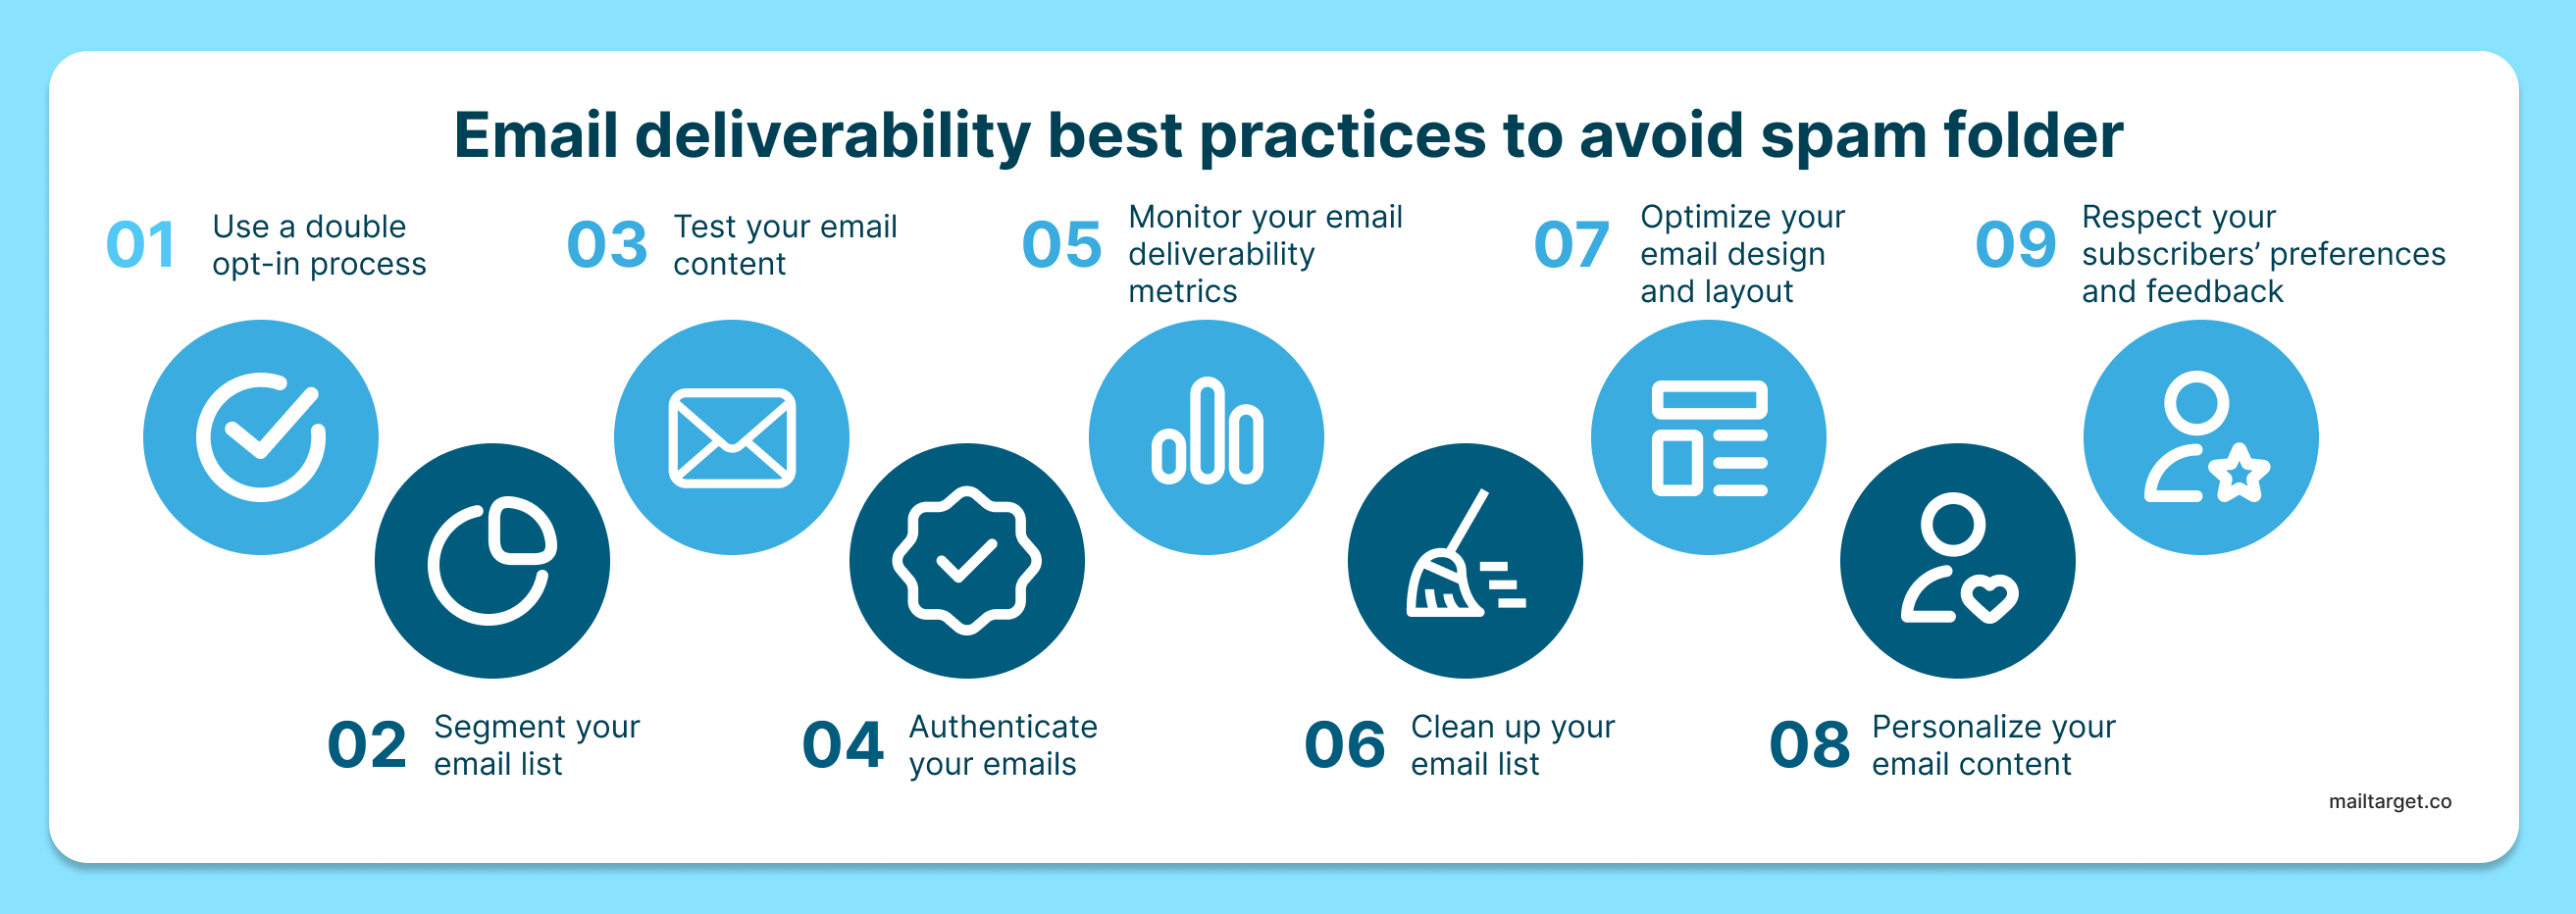 Email deliverability best practices to avoid spam folder